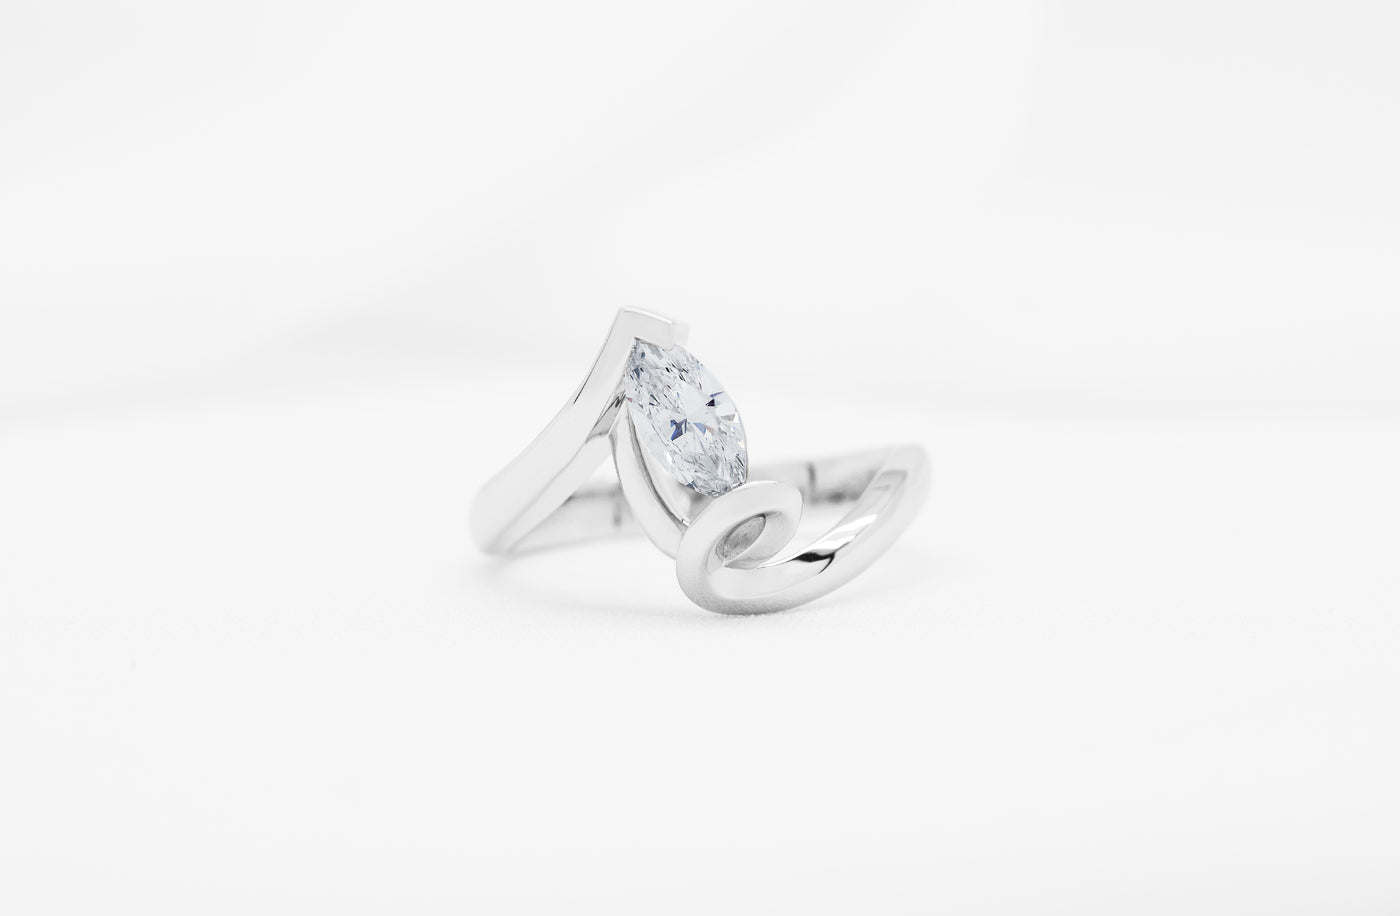 Inspired Collection, Diamond Ring, Jewellery, Jewelry, ring design, contemporary, modern, specialist, Platinum, 18k, 18ct, white gold, marquise cut diamond, spiral, flow, twist, ready to ship, ready to go, 0.51ct, G colour, color, VS1 clarity